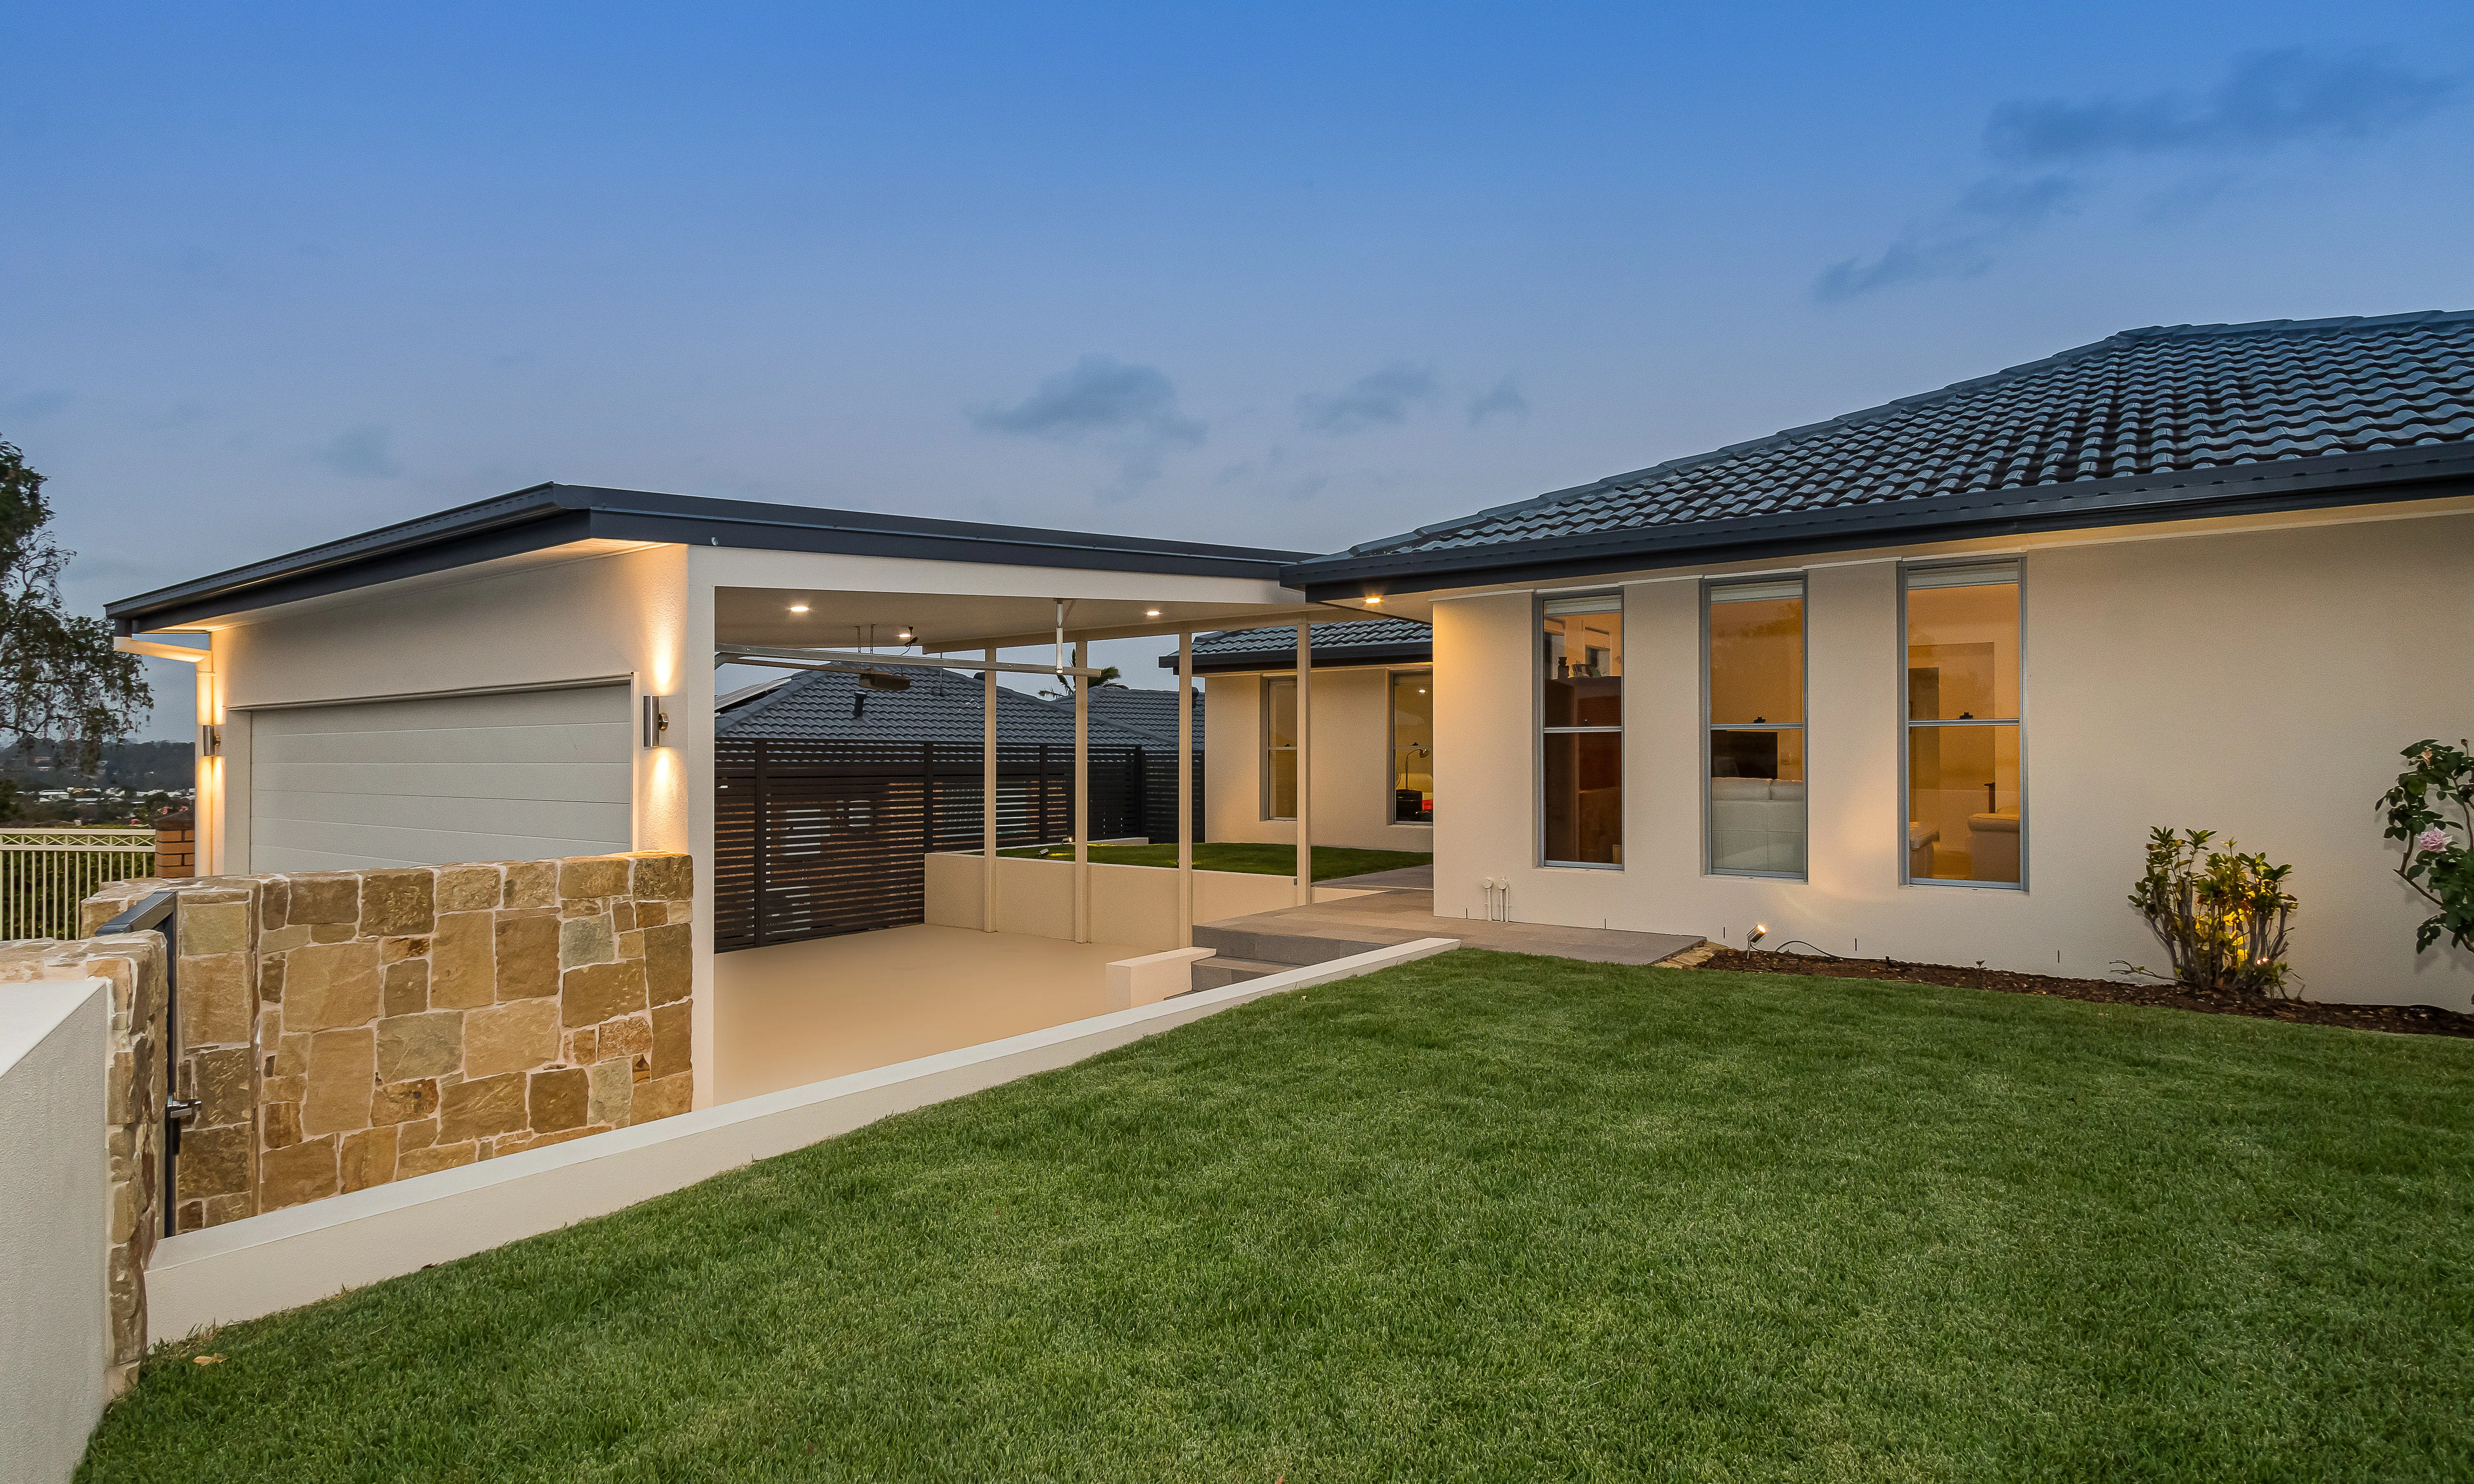 Rendered house, Clancy wall cladding, double carport 